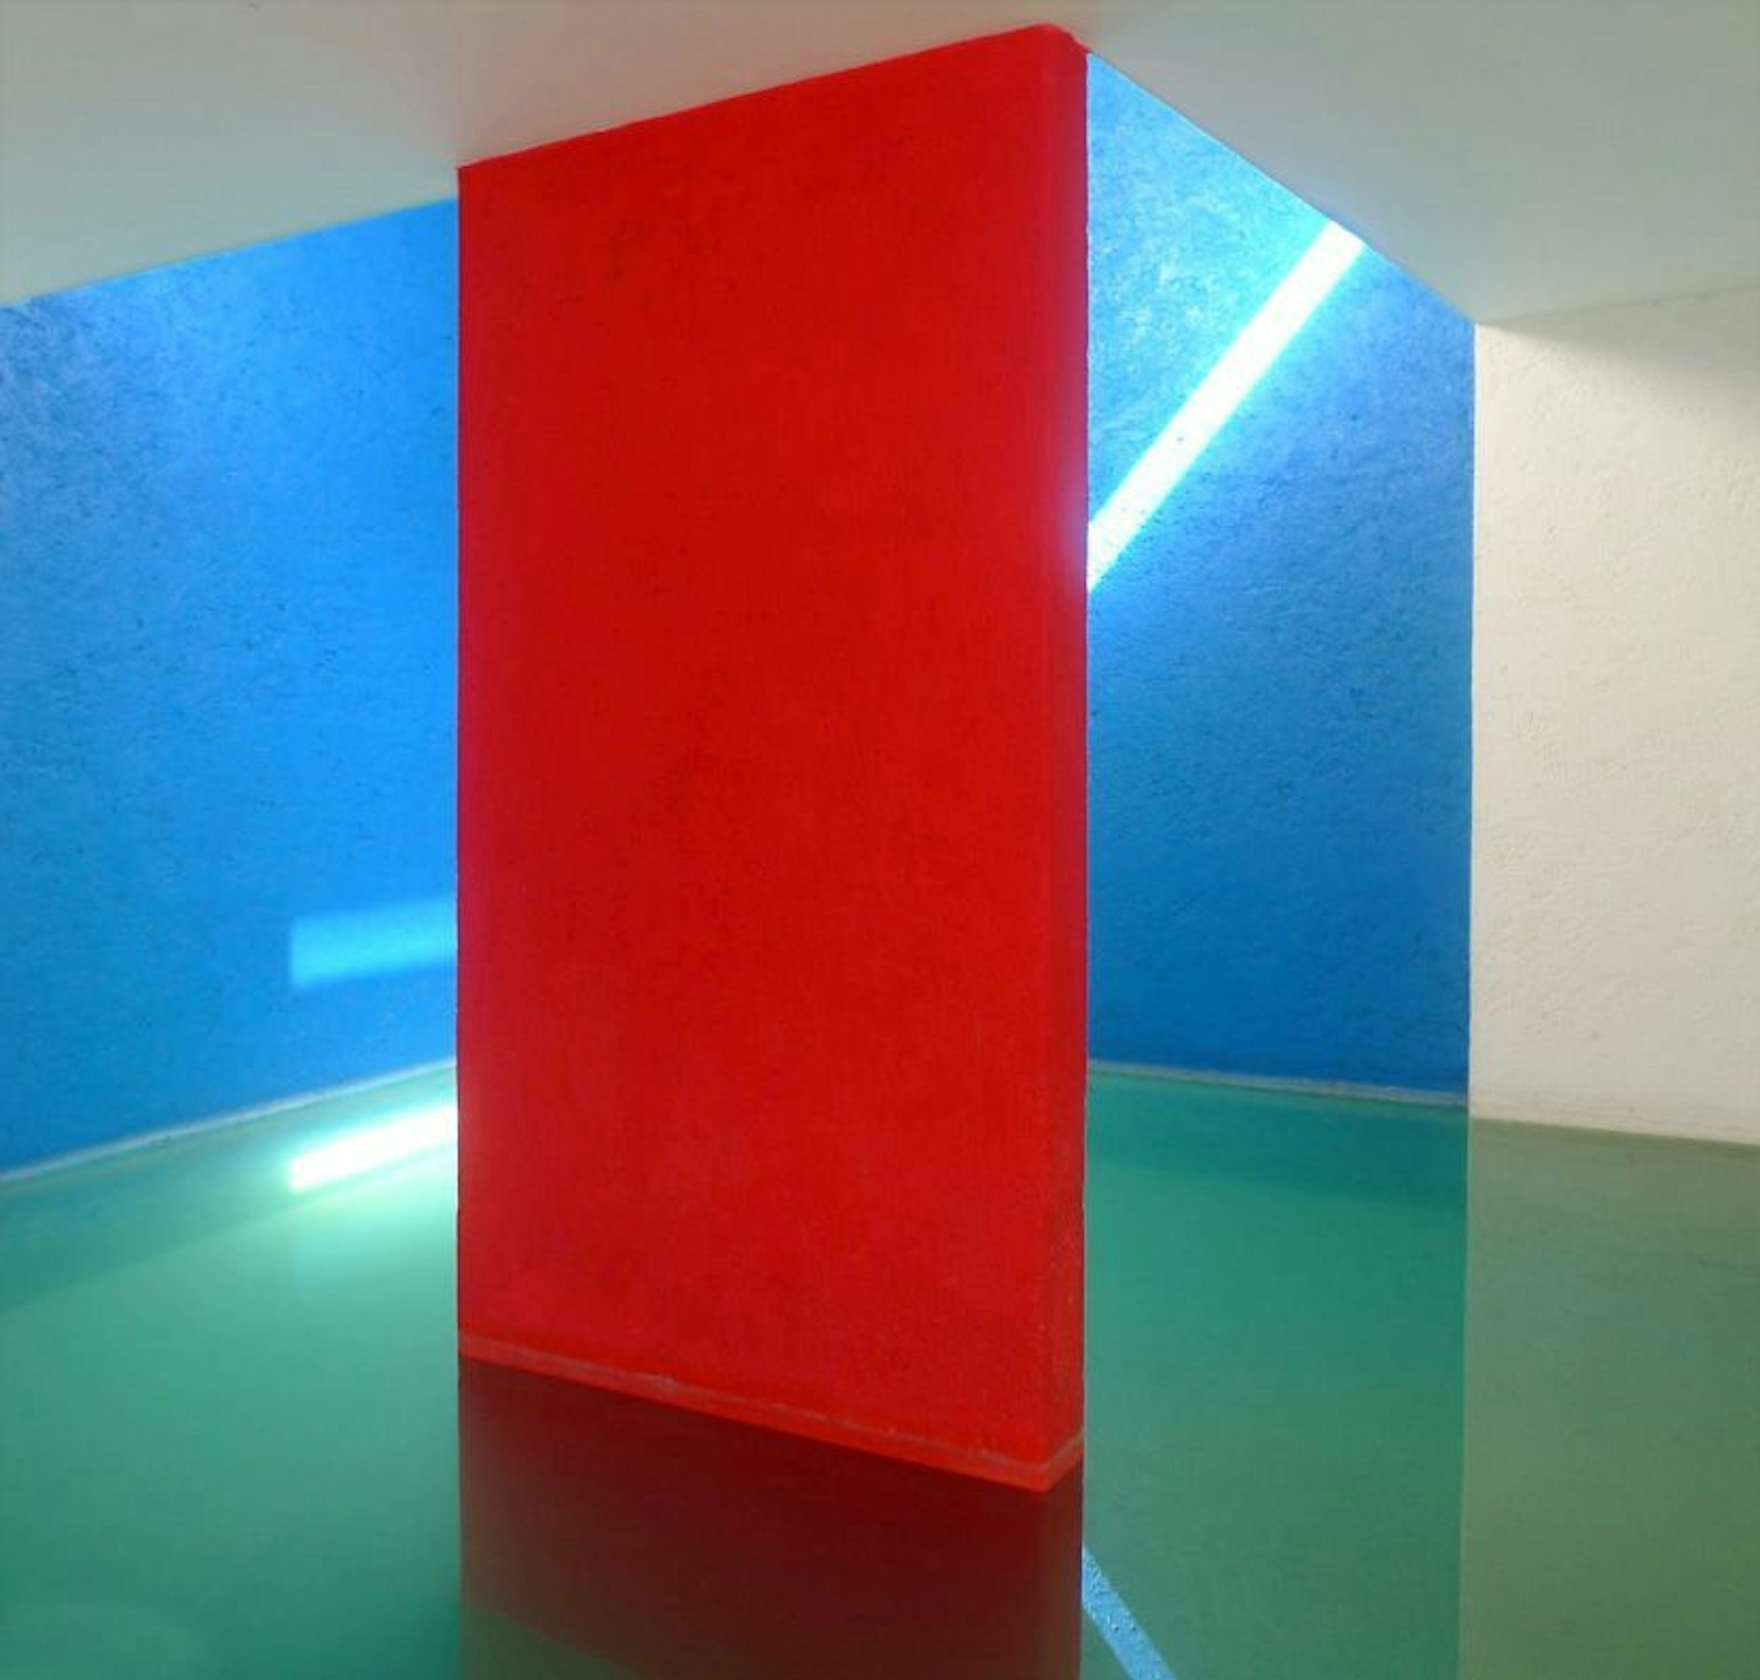 16 The Vivid Colors and Textures of Luis Barragán ideas - Dwell